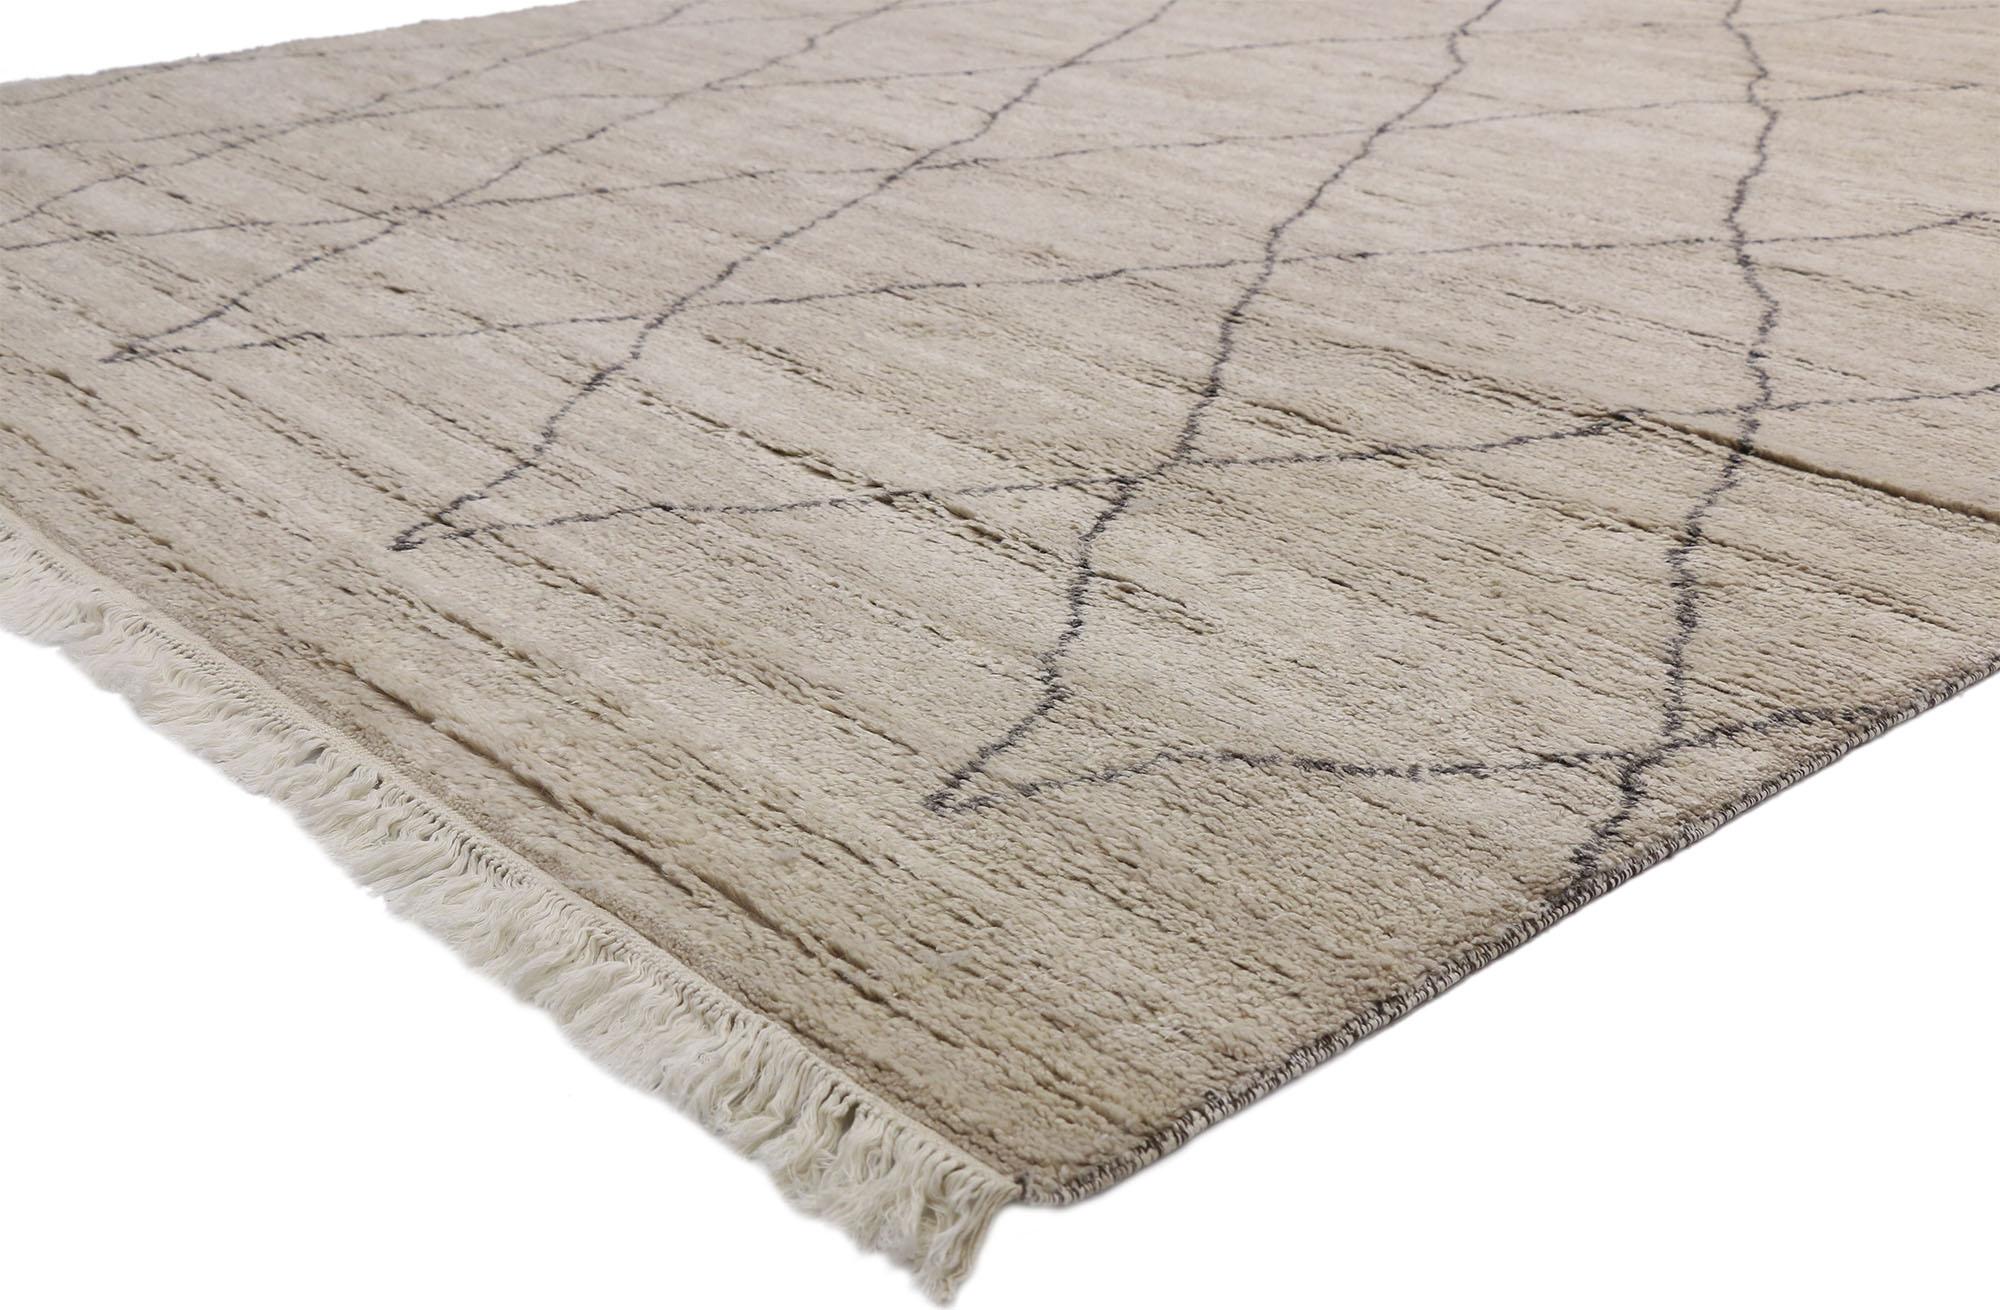 30476, new contemporary Moroccan Area rug with Modernist style and Hygge vibes. This hand knotted wool contemporary Moroccan area rug features contrasting gray lines running the length of the sandy-beige backdrop. The dark gray lines crisscross in